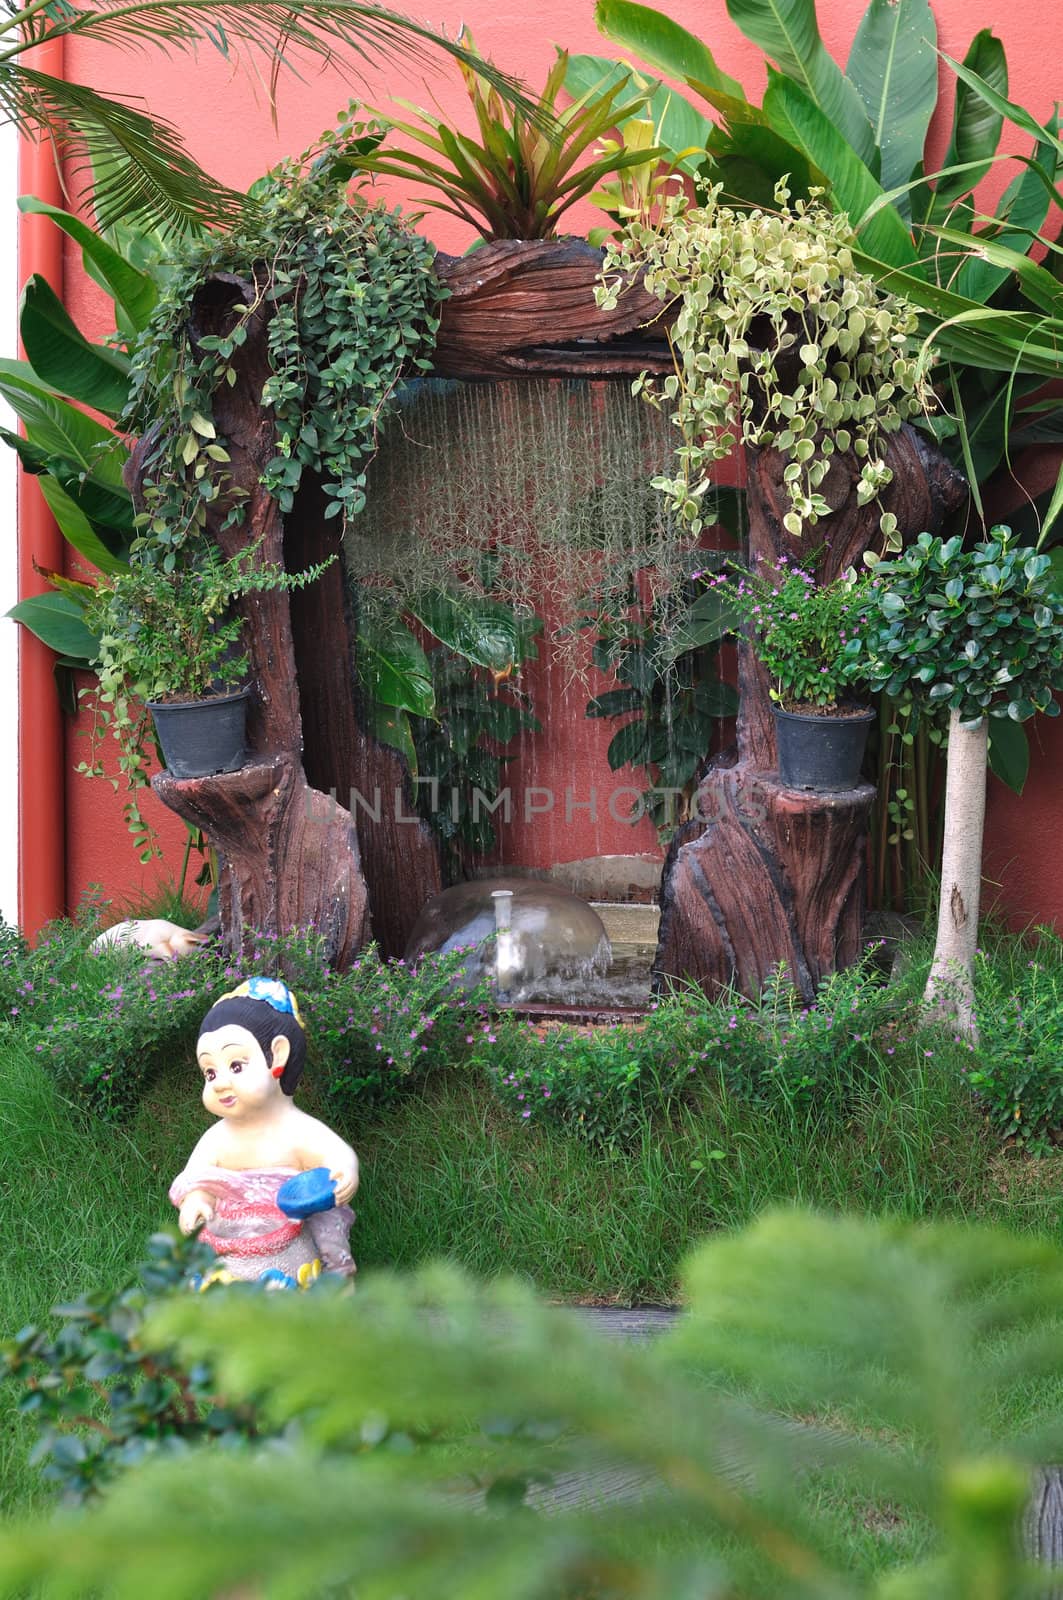 Clay Doll and Waterfall in the garden.